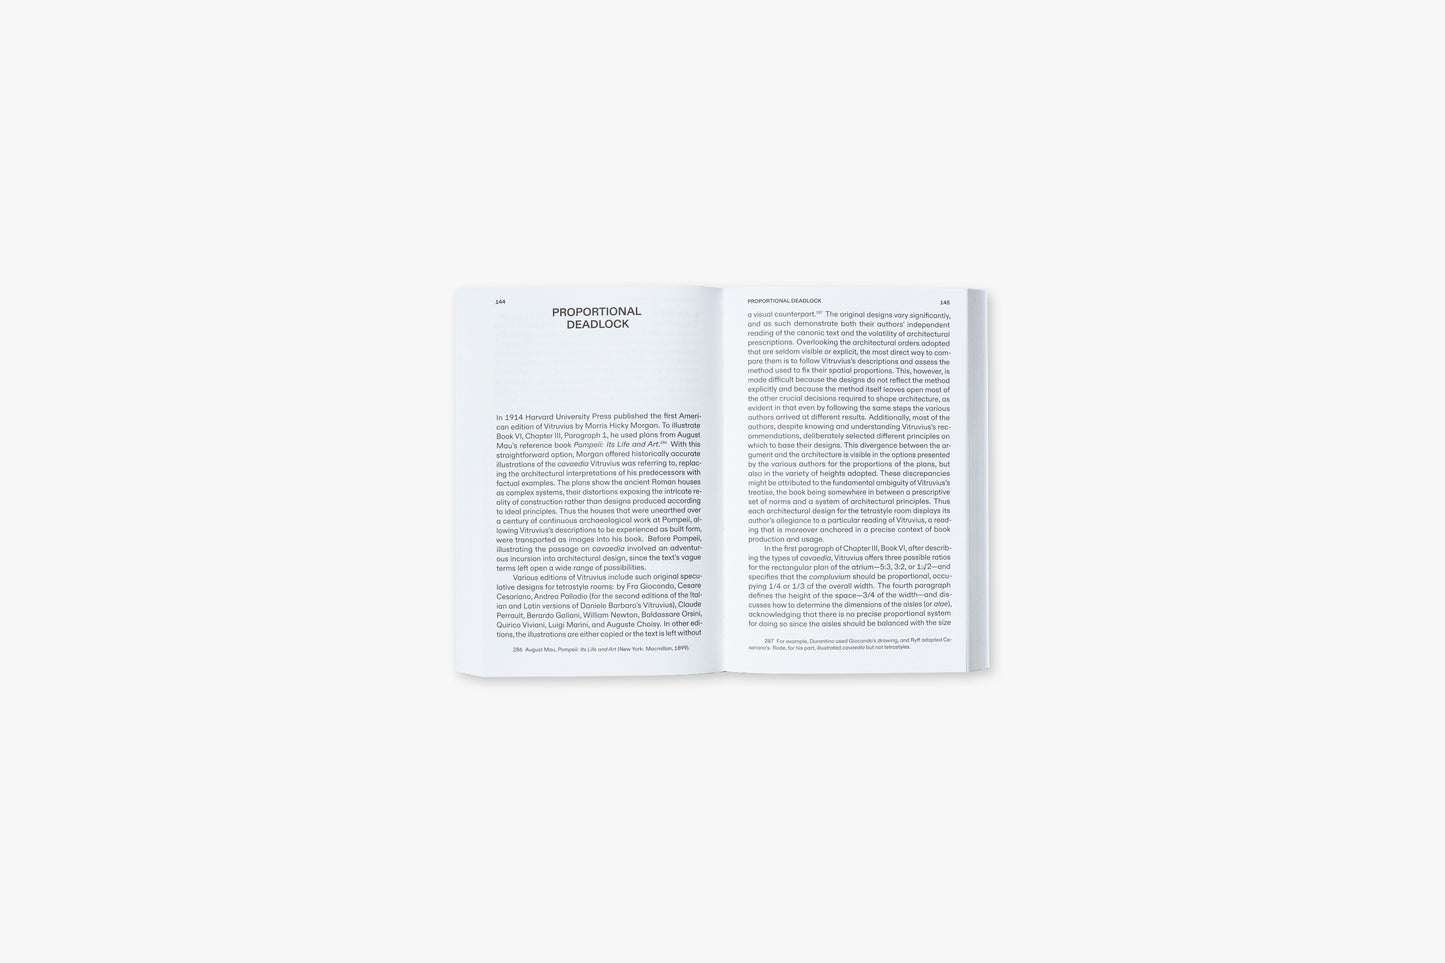 Vitruvius Without Text: The Biography Of A Book